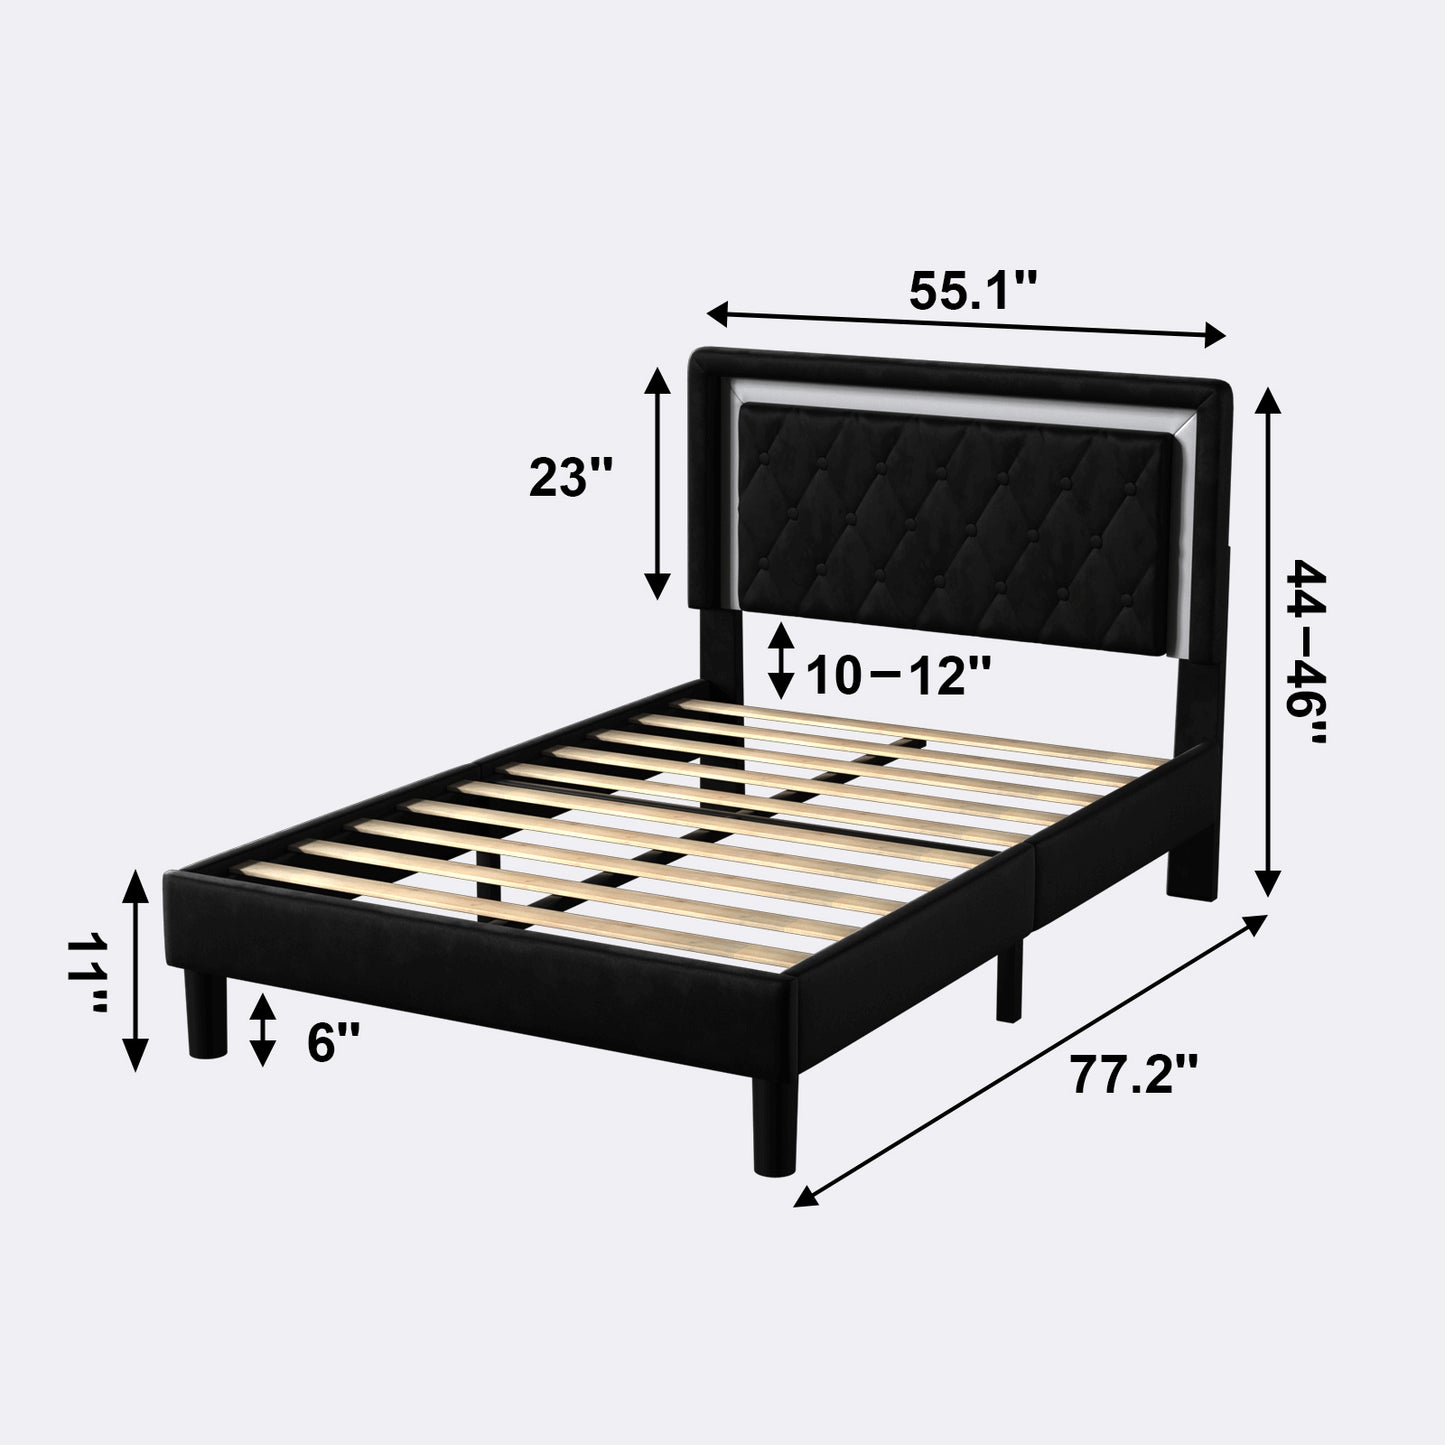 Full Size Frame Platform Bed with Upholstered Headboard and Slat Support, Heavy Duty Mattress Foundation, No Box Spring Required, Easy to Assemble,black